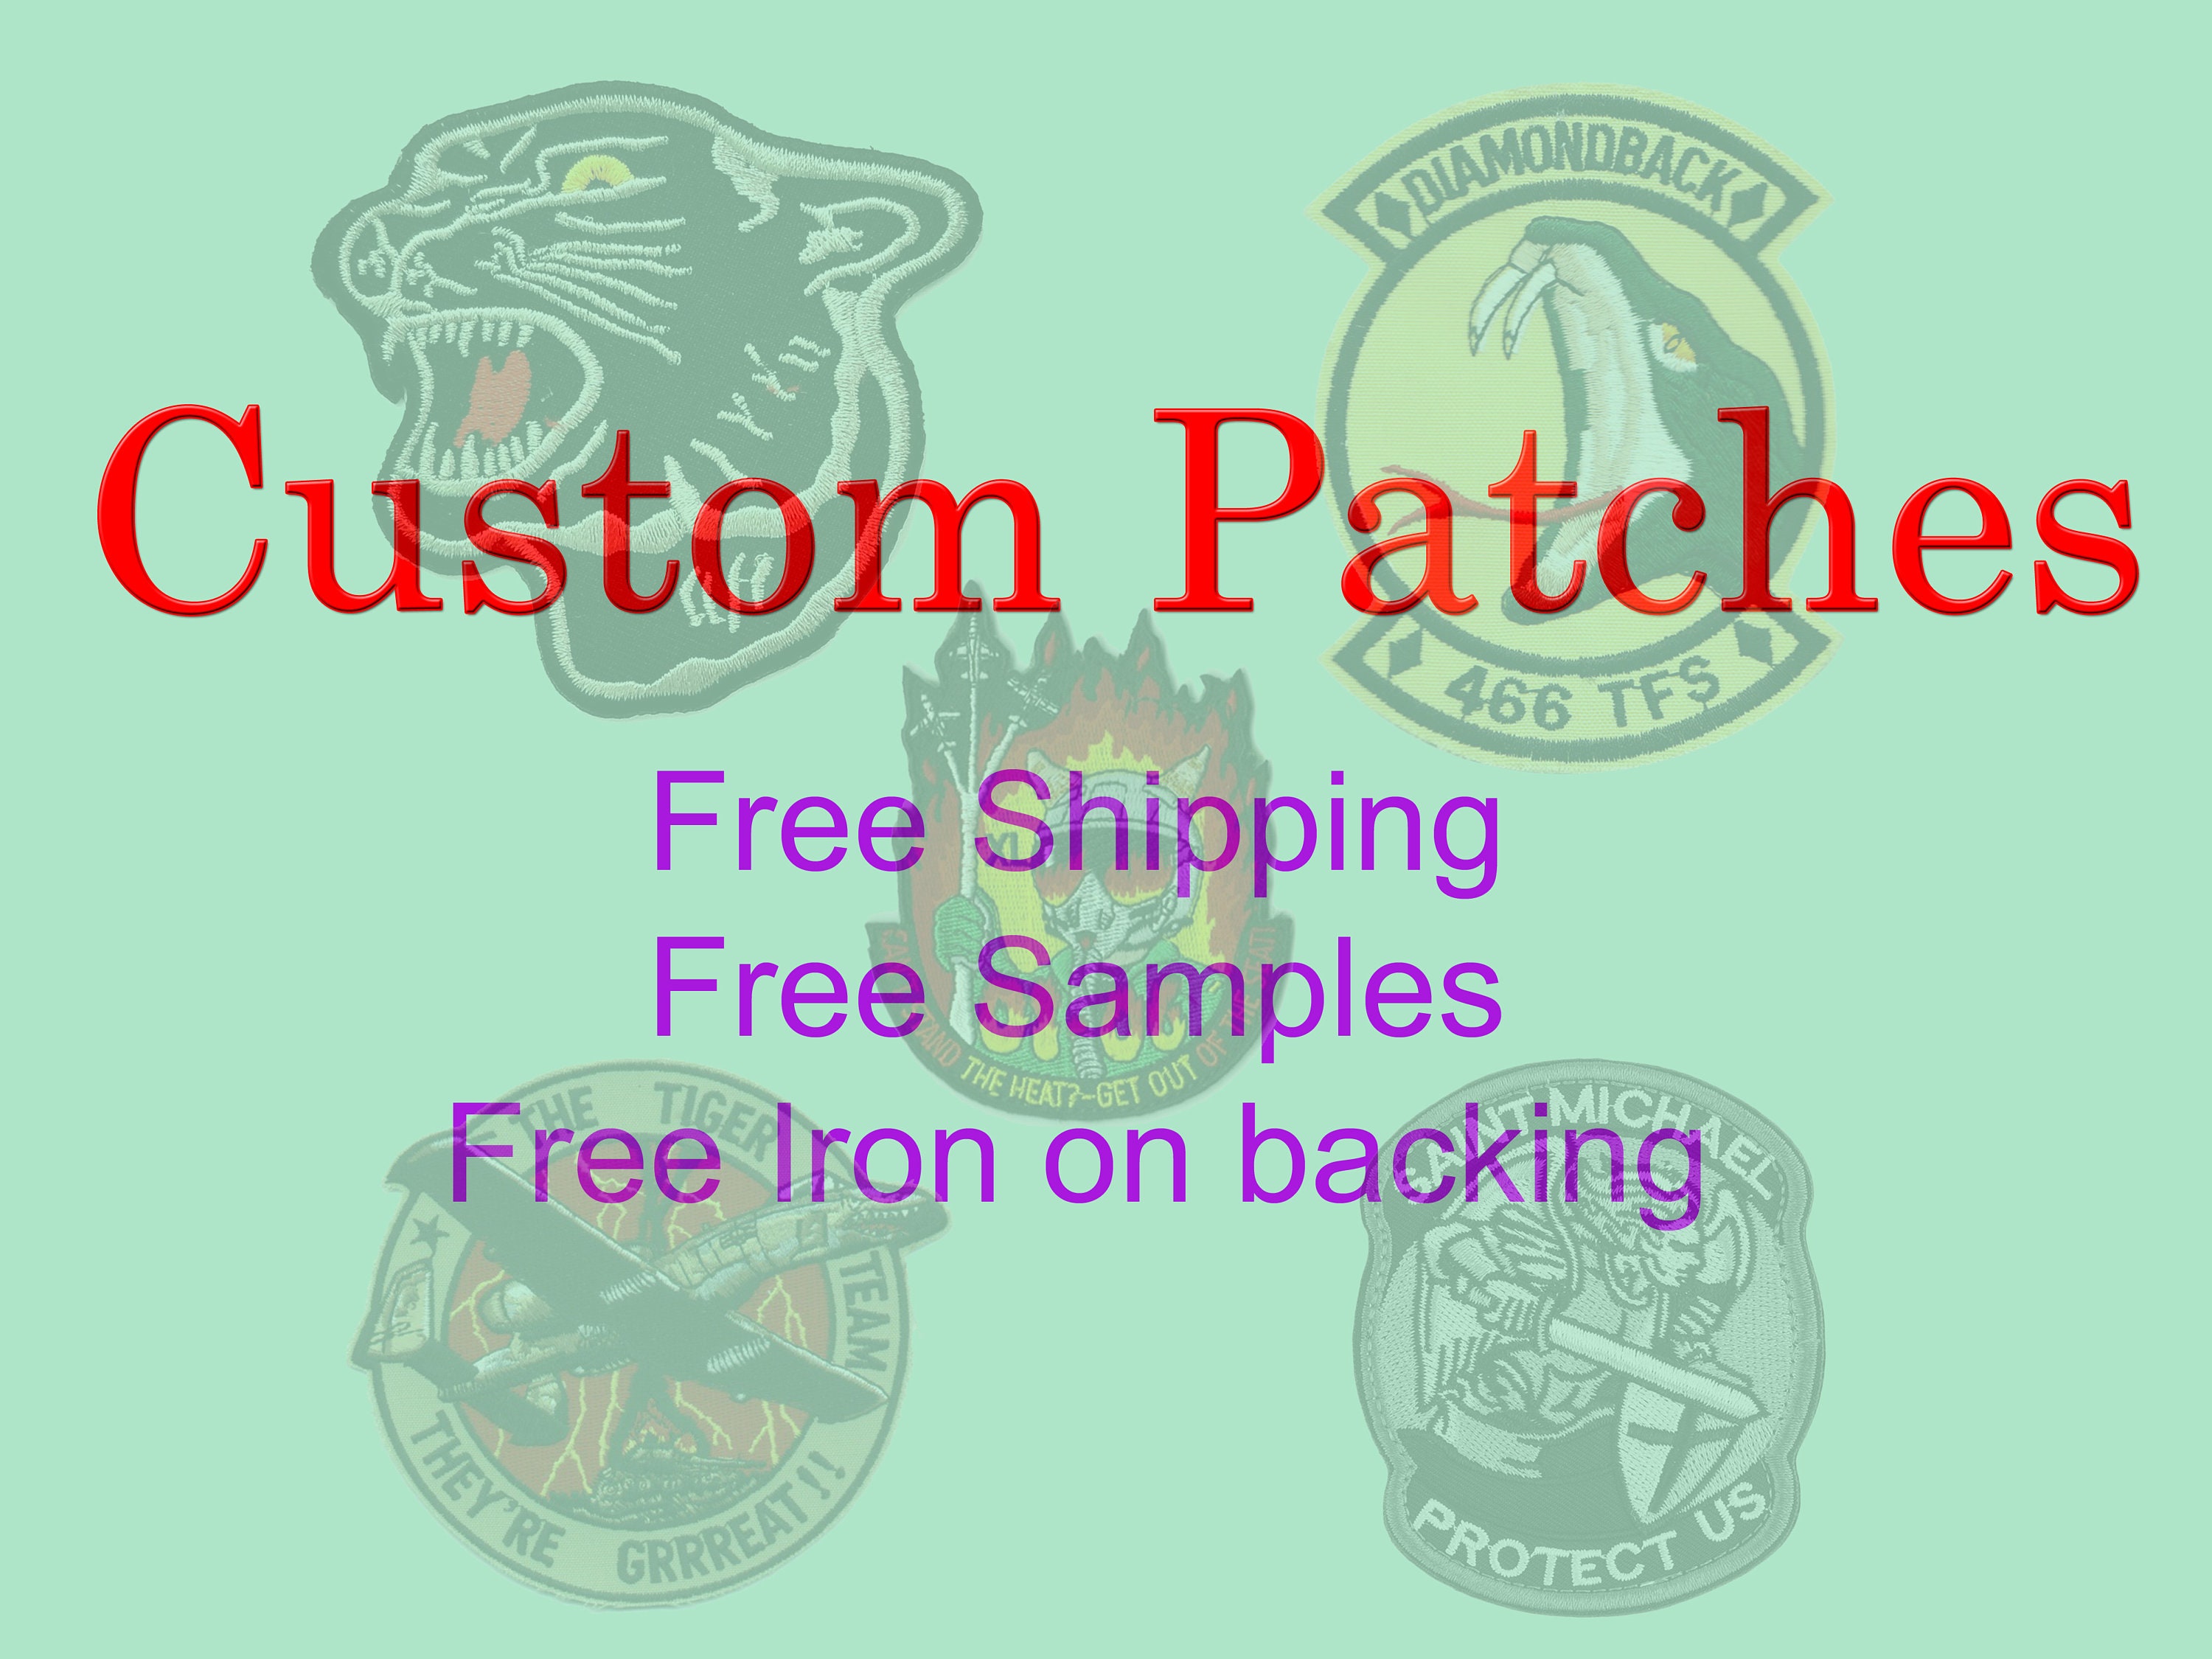 Embroidered Patches, Custom Made Patch, Made to Order, Free Shipping on All  Orders, No Minimum, Iron on Backing Available 